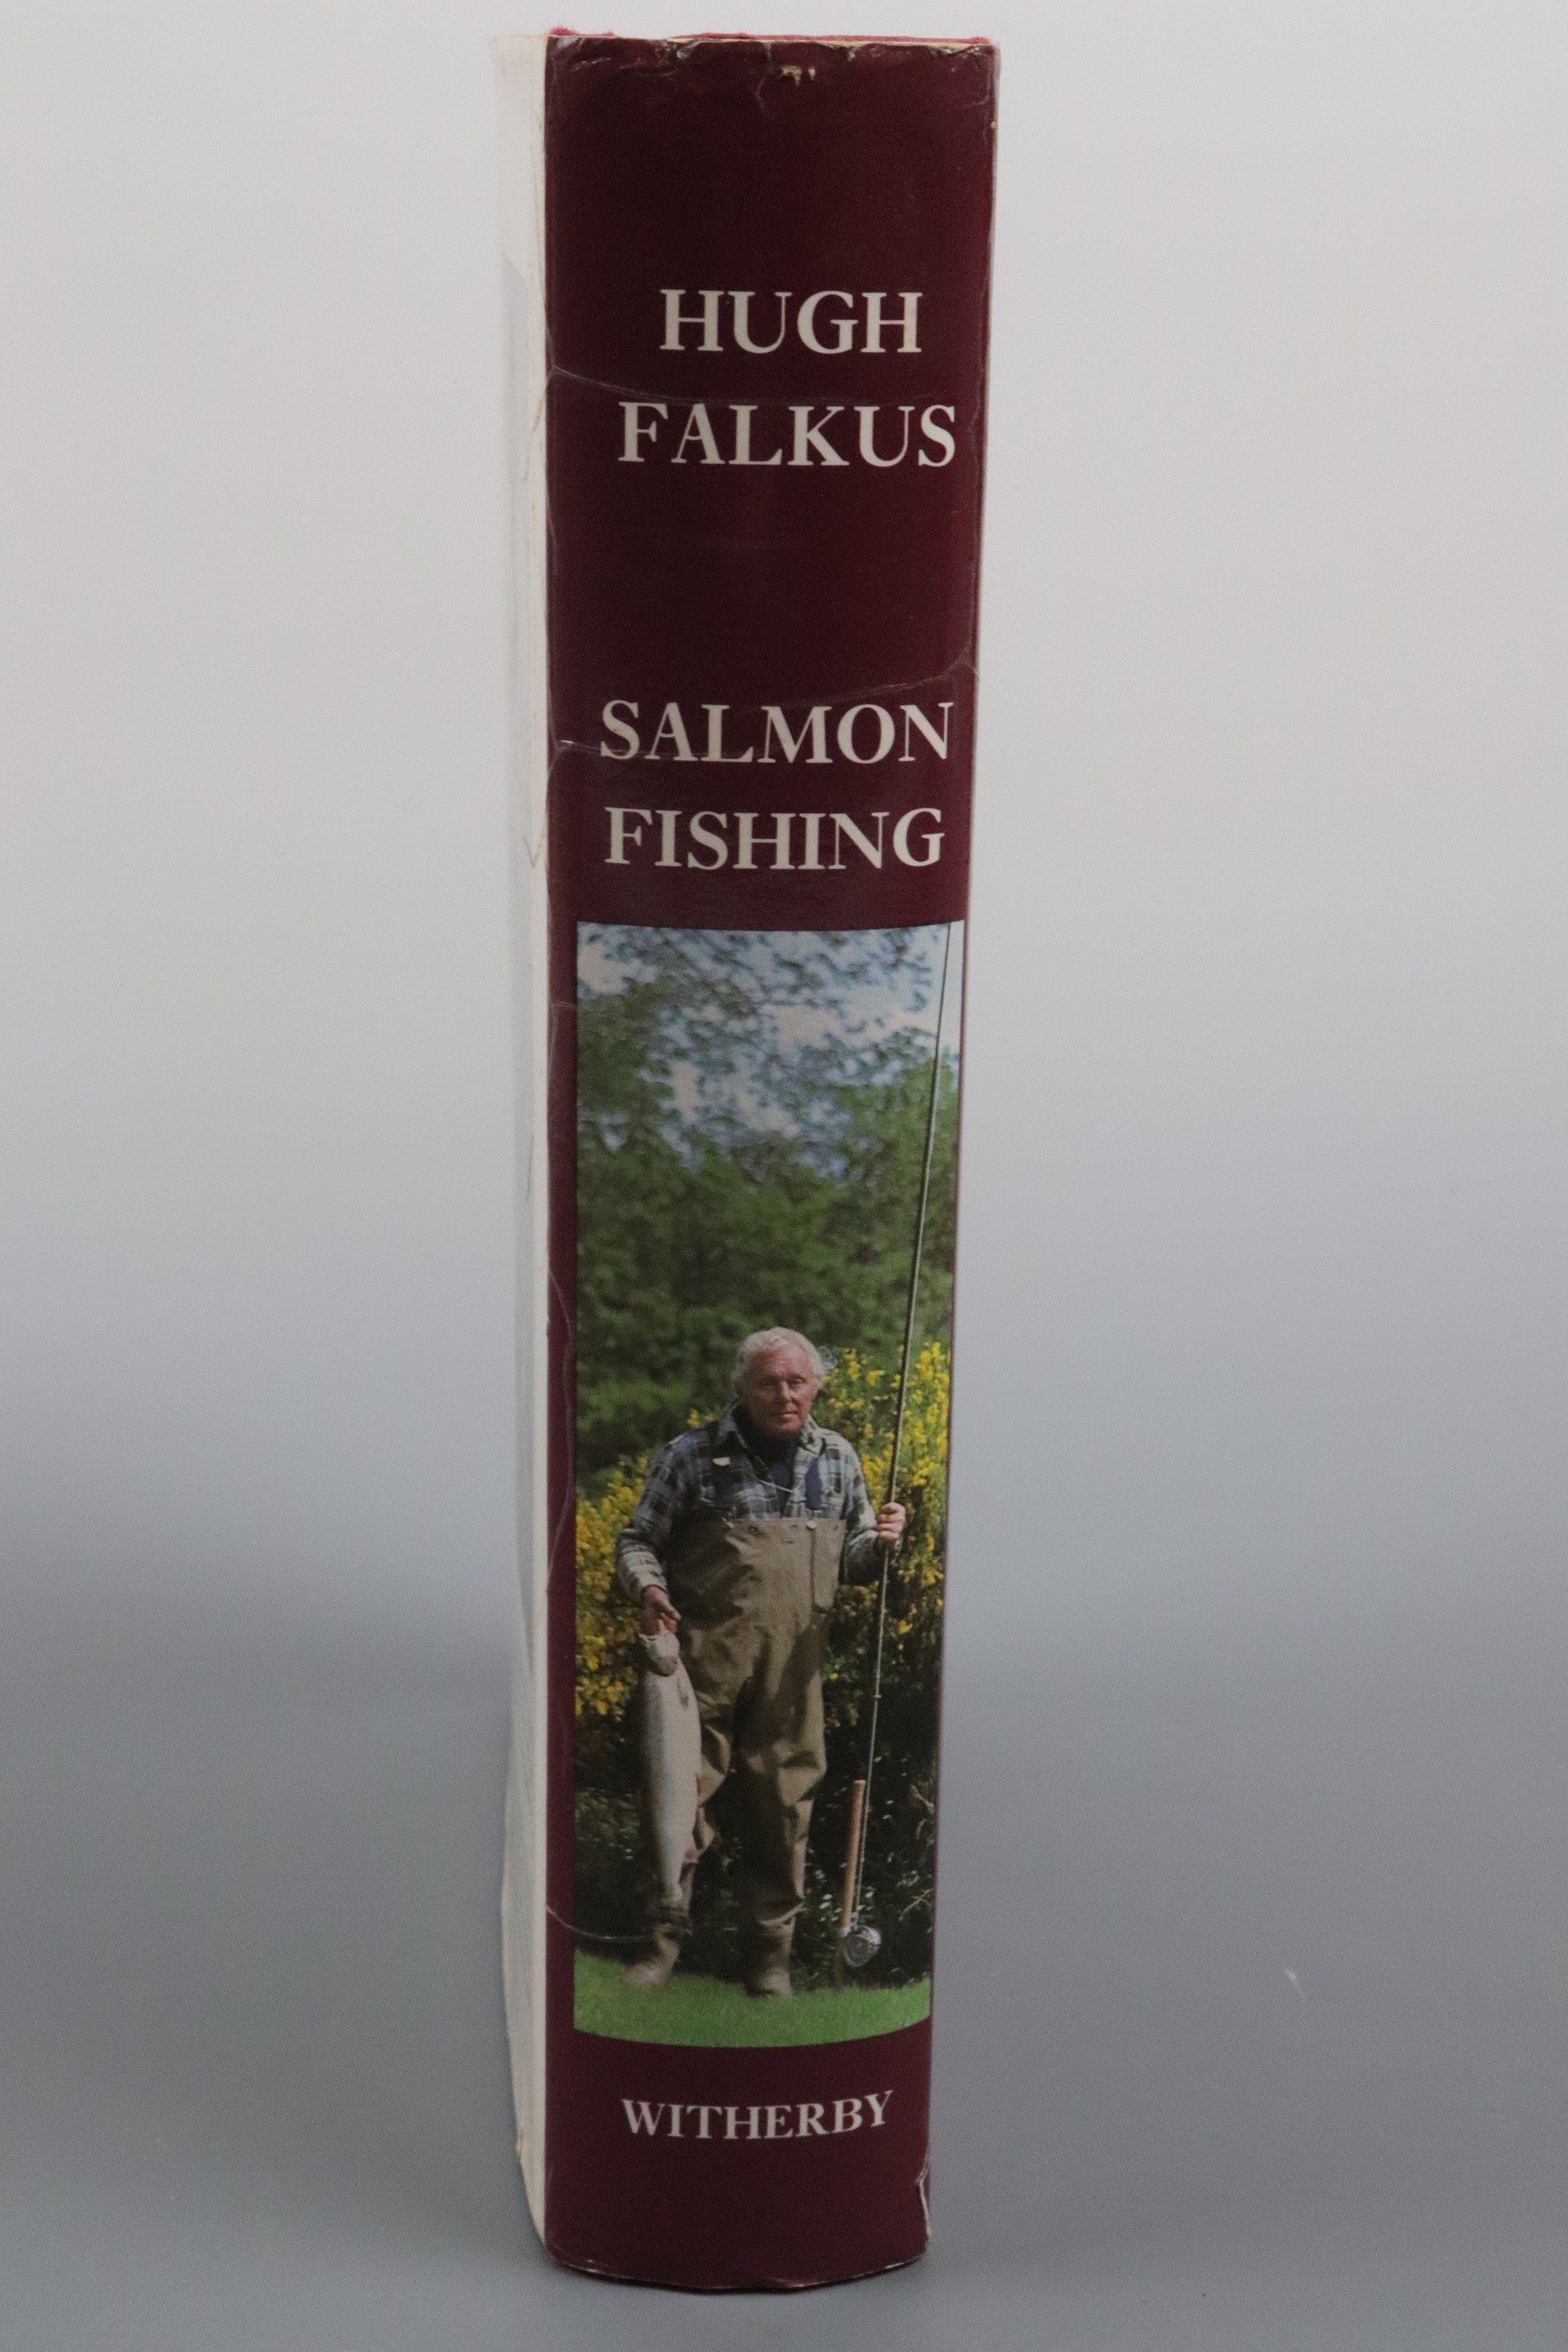 An author-inscribed presentation copy of Hugh Falkus', Salmon Fishing, a Practical Guide, 1984